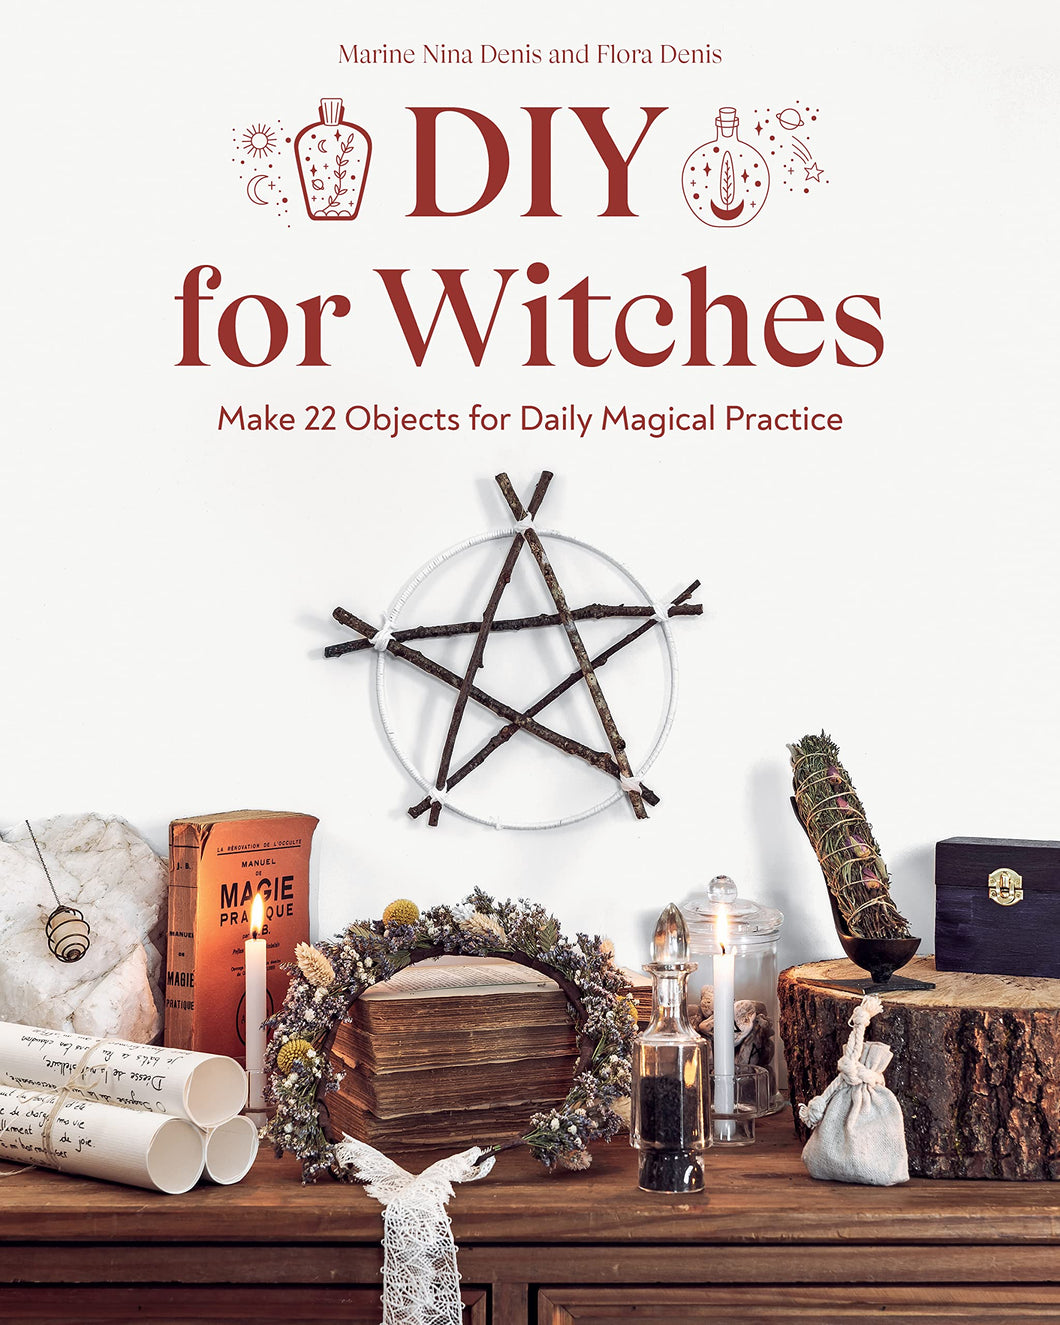 DIY For Witches: Make 22 Objects For Daily Magical Practice [Marine Nina Denis & Flora Denis]